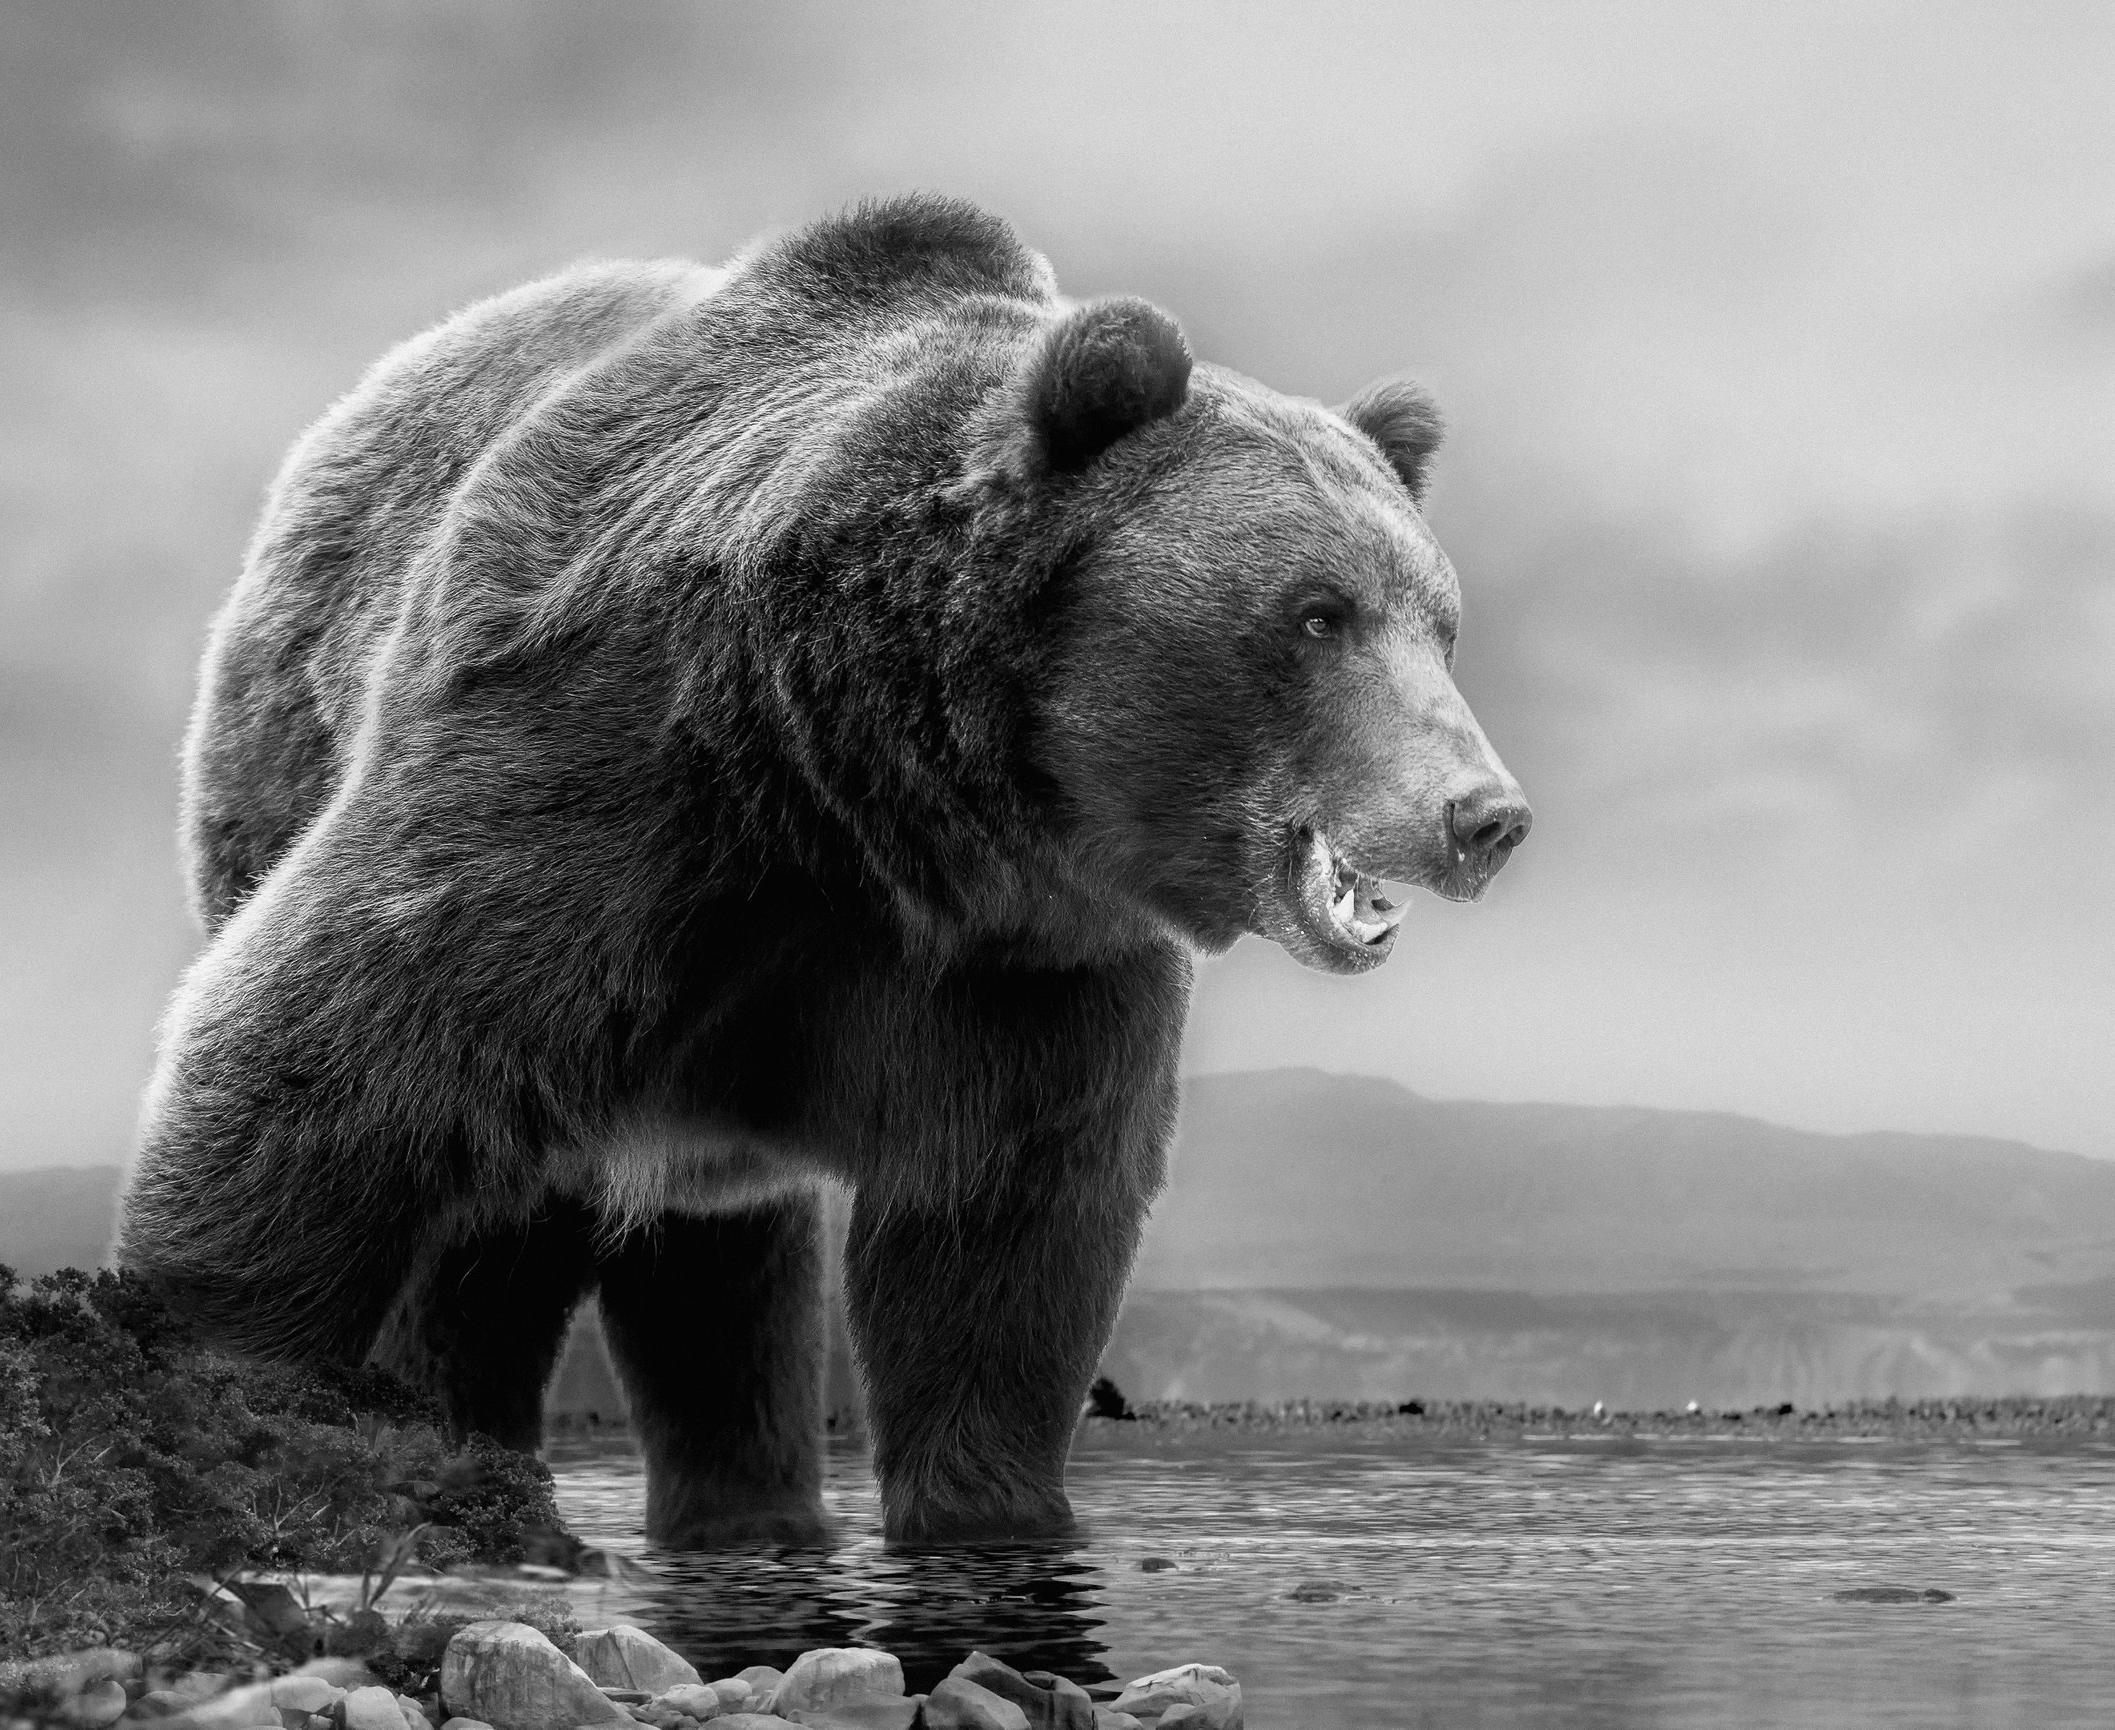 Shane Russeck Black and White Photograph - "On The Waterfront" 45x60 Black & White Photography, Kodiak, Grizzly Bear  Art